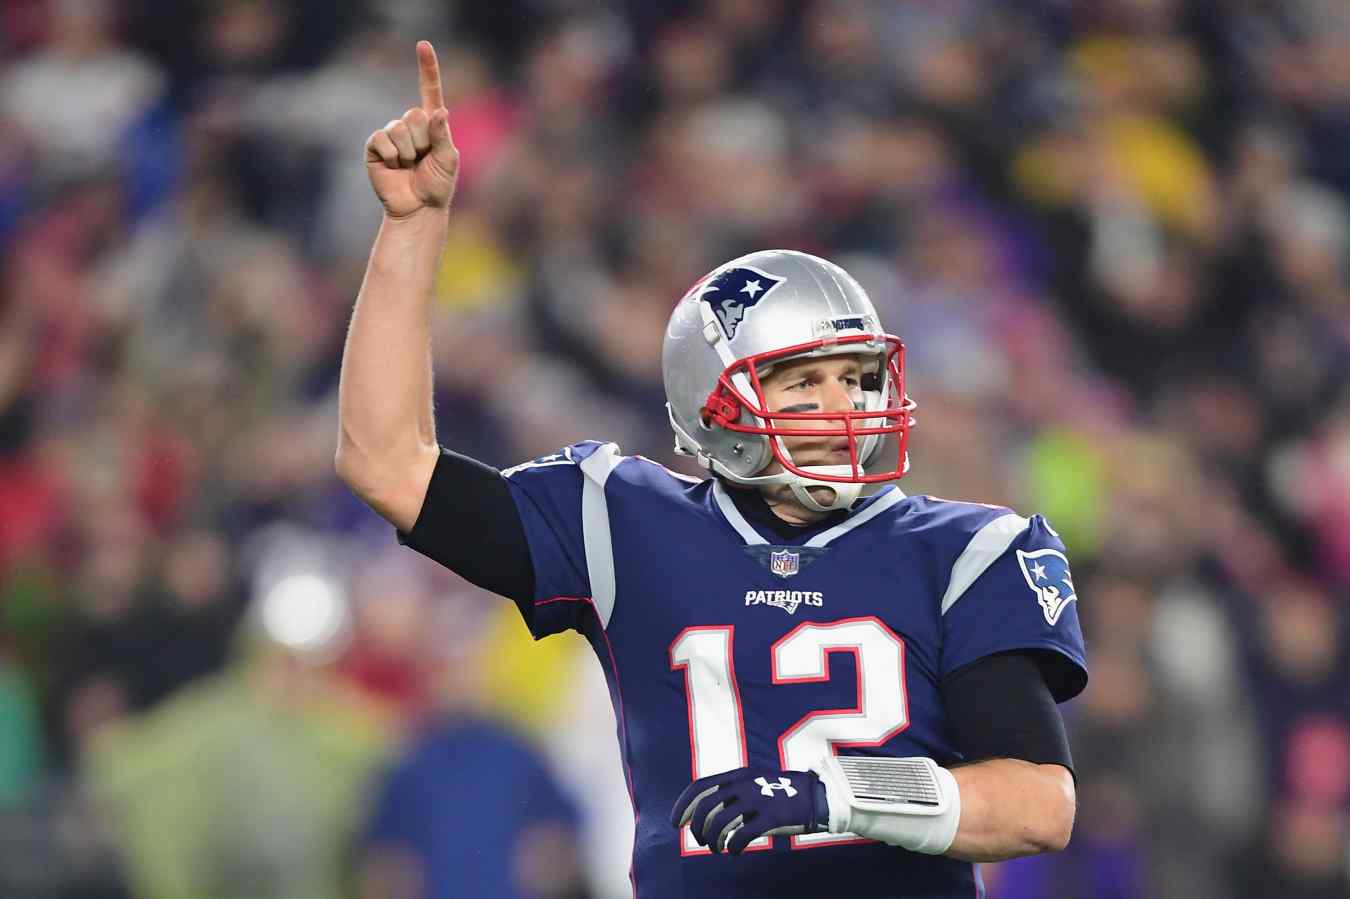 Patriots Playoff Picture Updated Standings & Scenarios After Win